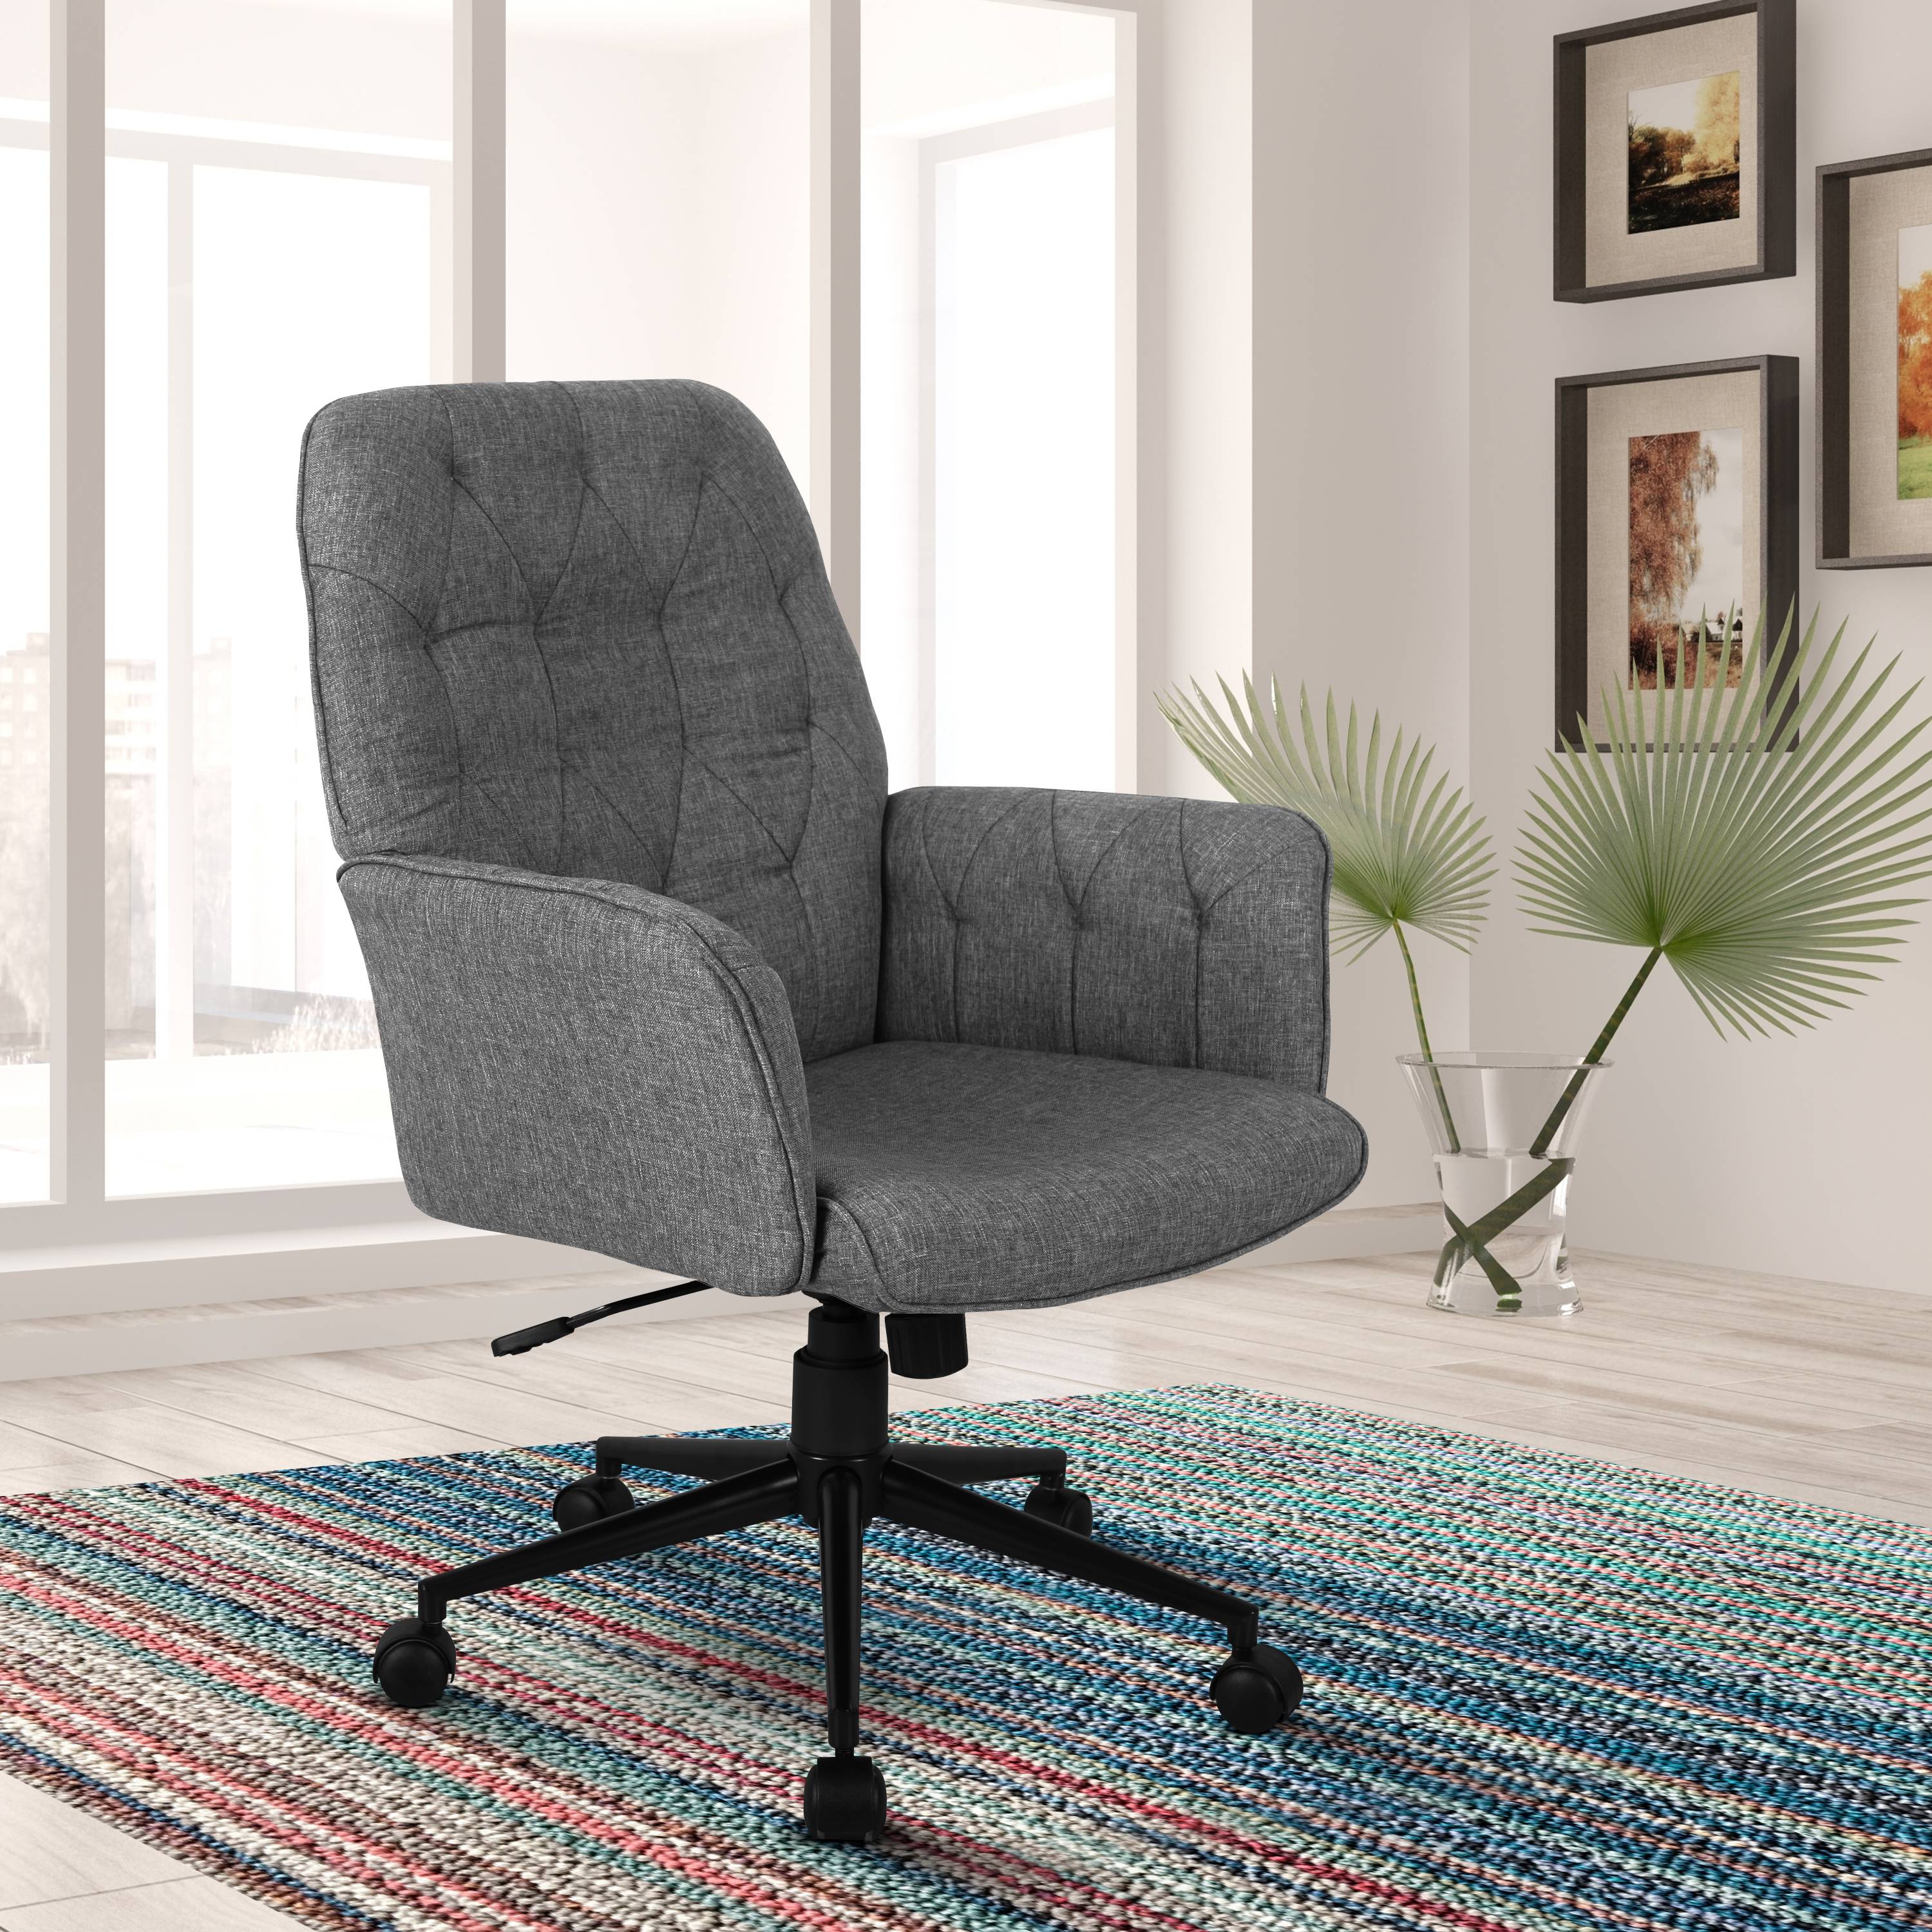 Techni Mobili Upholstered Tufted Office Chair